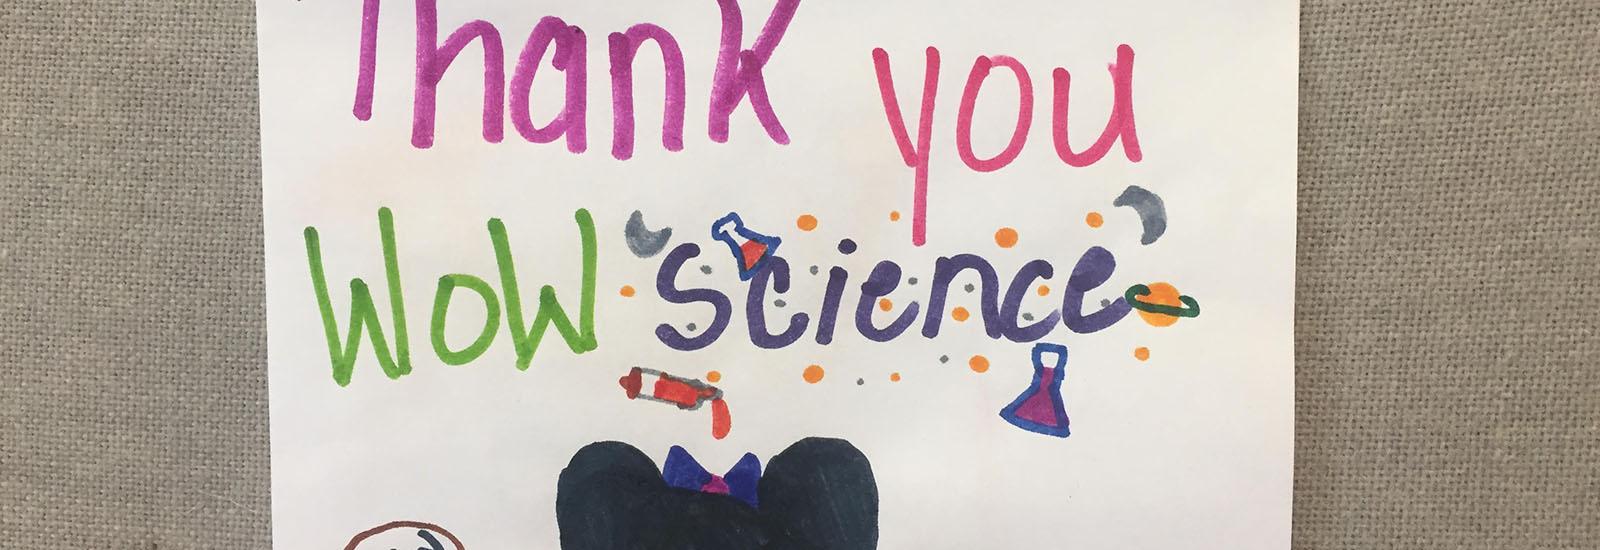 Image of a thank you card from an elementary school student